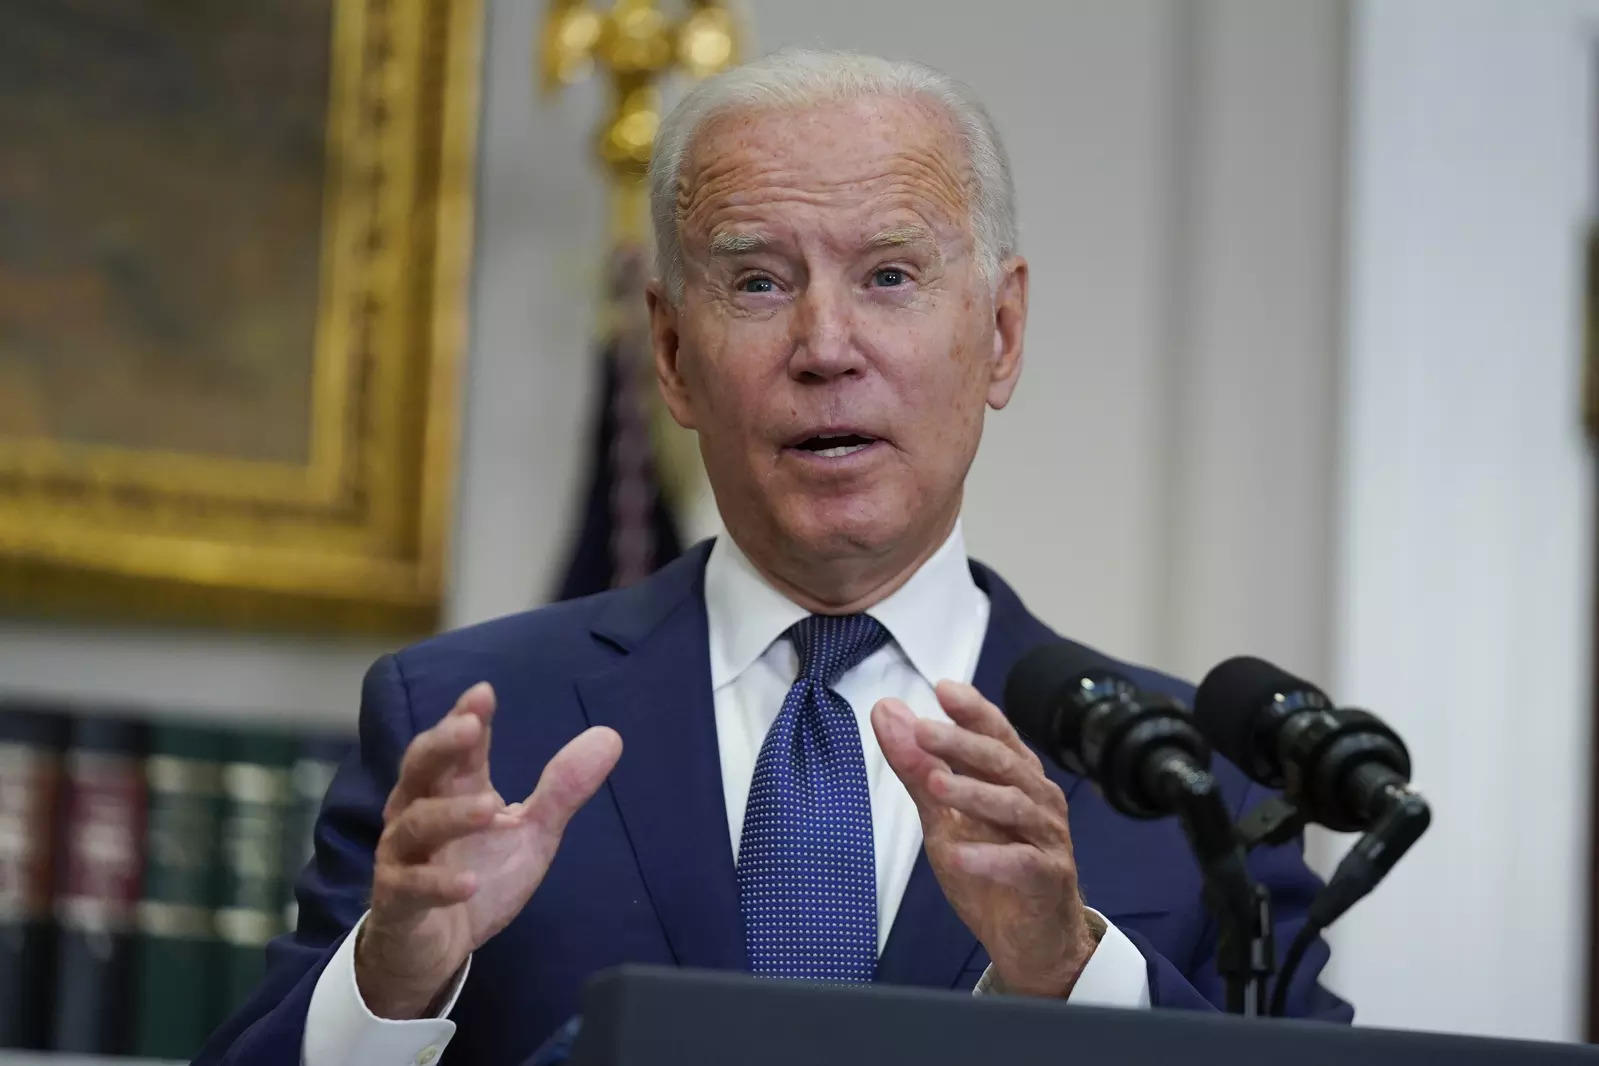 President Joe Biden answers a question from a reporter about the situation in Afghanistan  in the White House on Sunday, Aug. 22, 2021, in Washington. (AP)